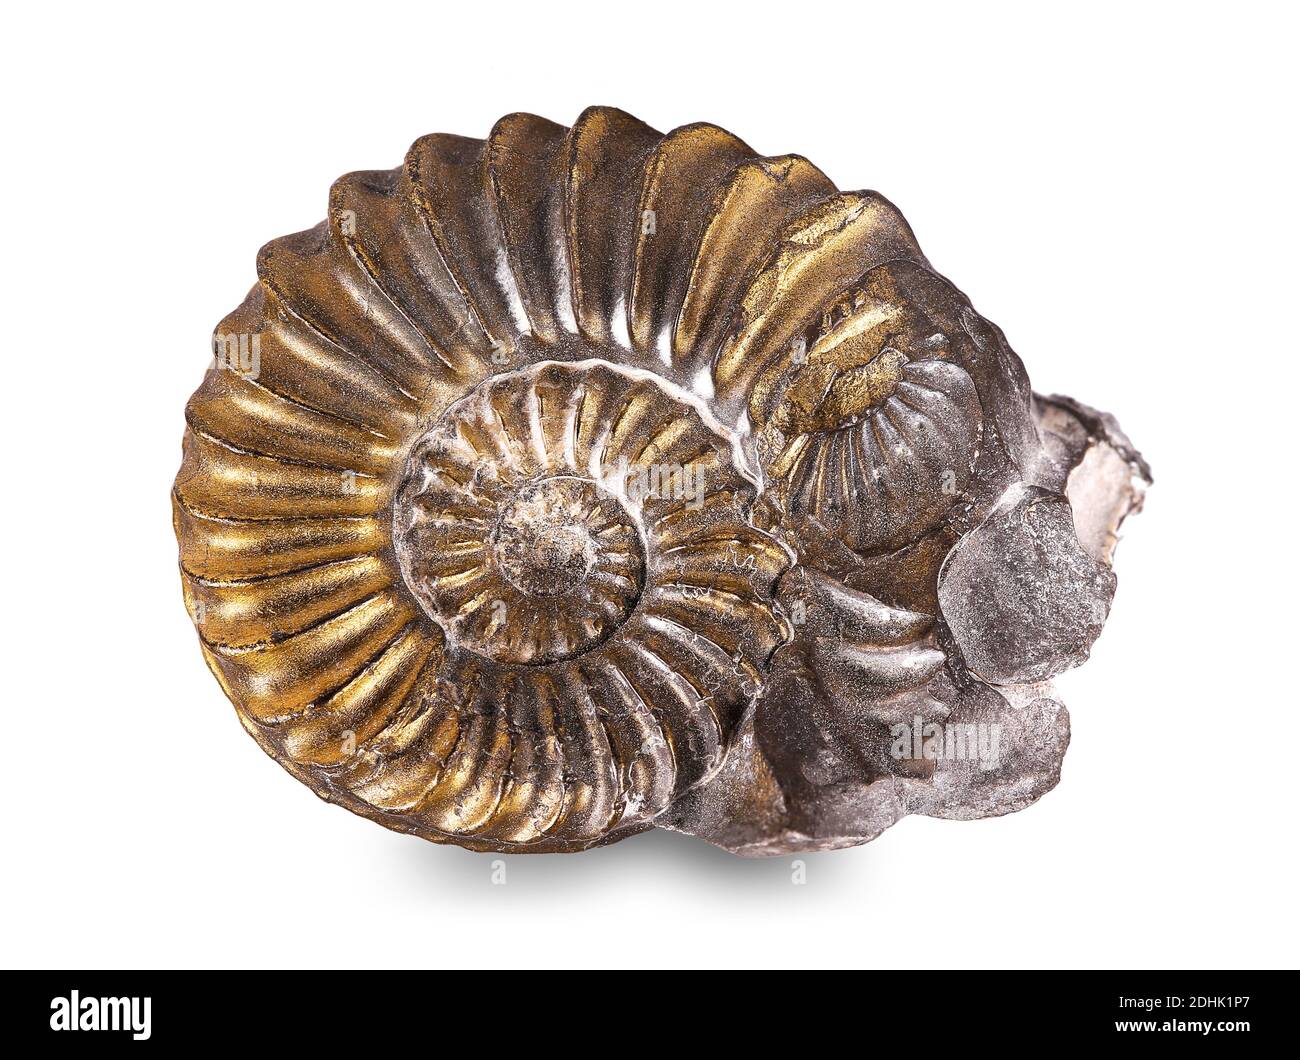 Fossilized snail in the stone, ammonite Stock Photo